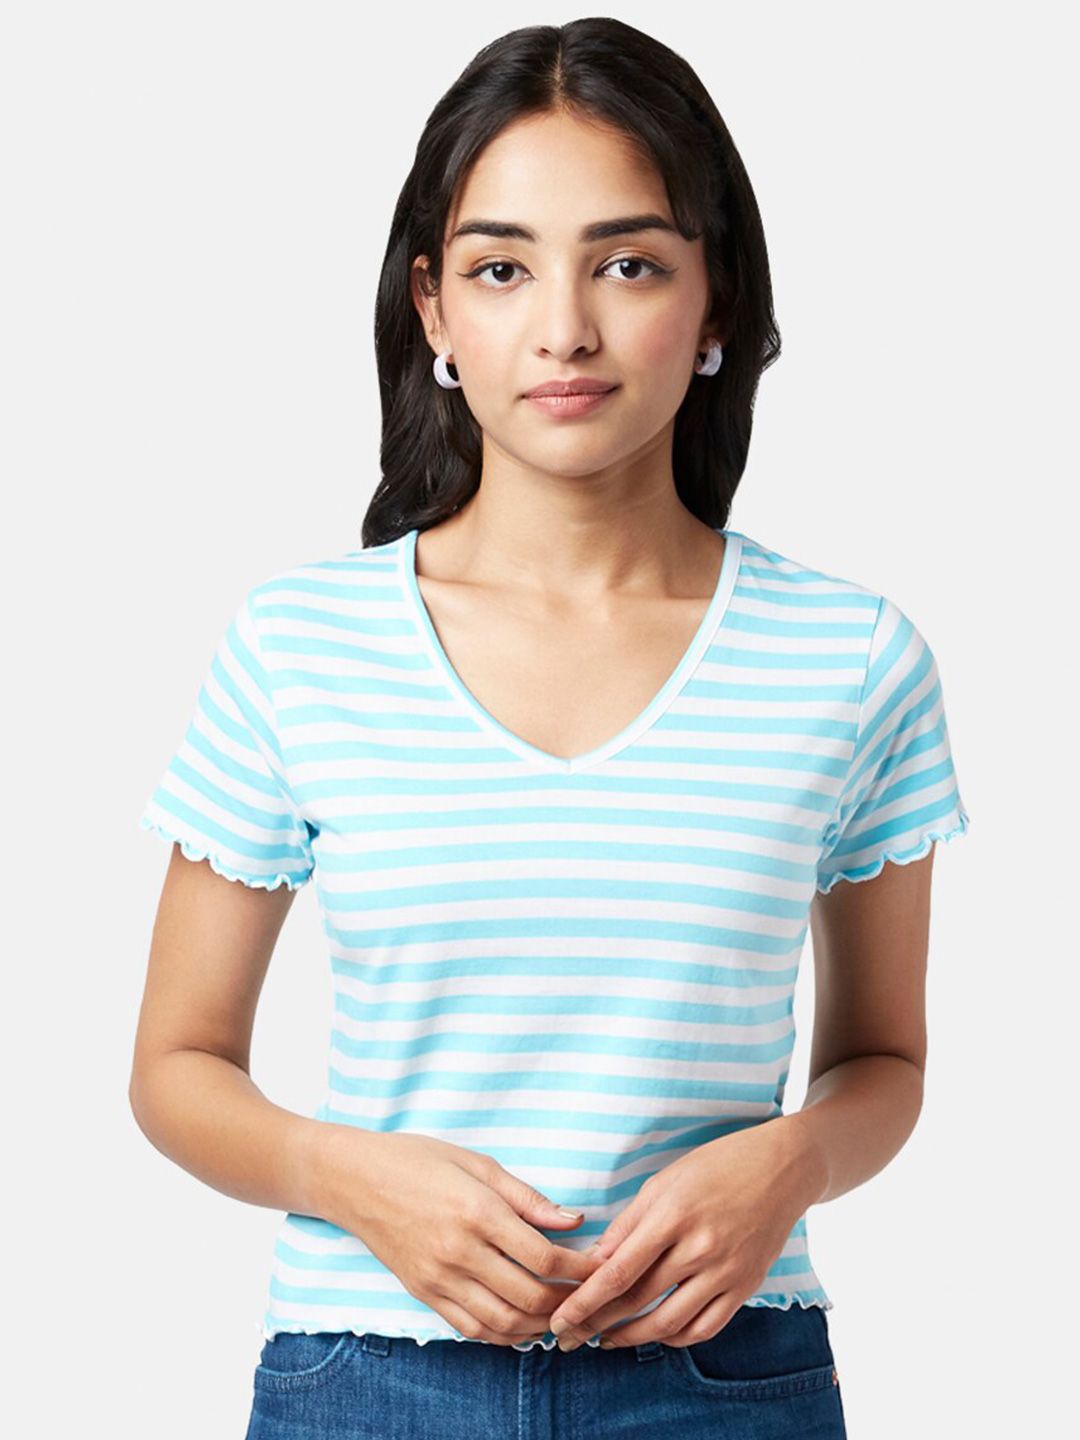 YU by Pantaloons Striped V-Neck Top Price in India